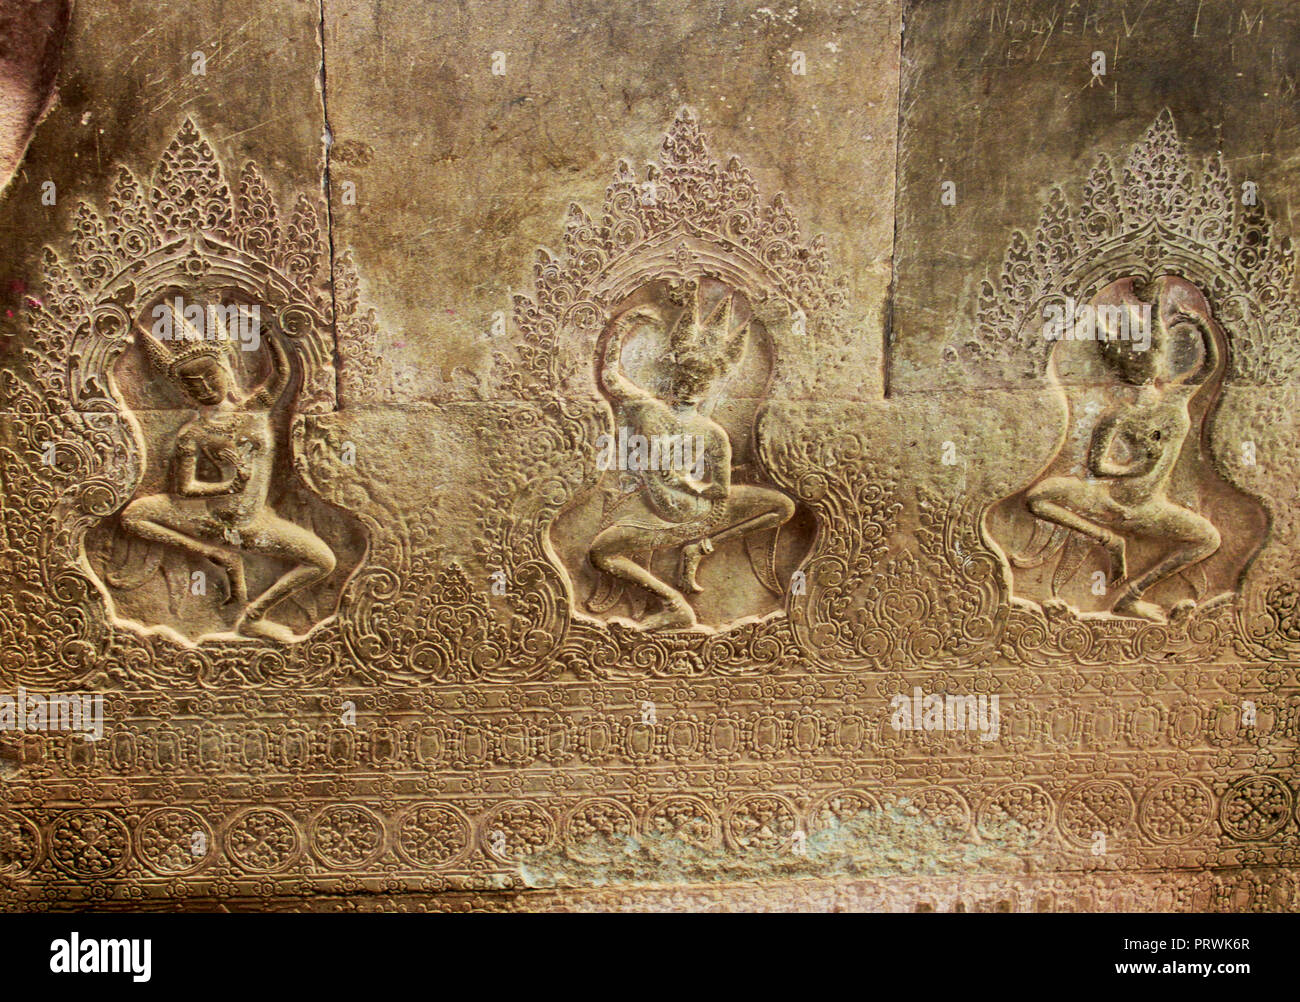 Buddha cravings on the wall of the Angkor Wat Temple in the Angkor Area, near Siem Reap, Cambodia, Asia. Buddhist monastery from the 12th century. Stock Photo